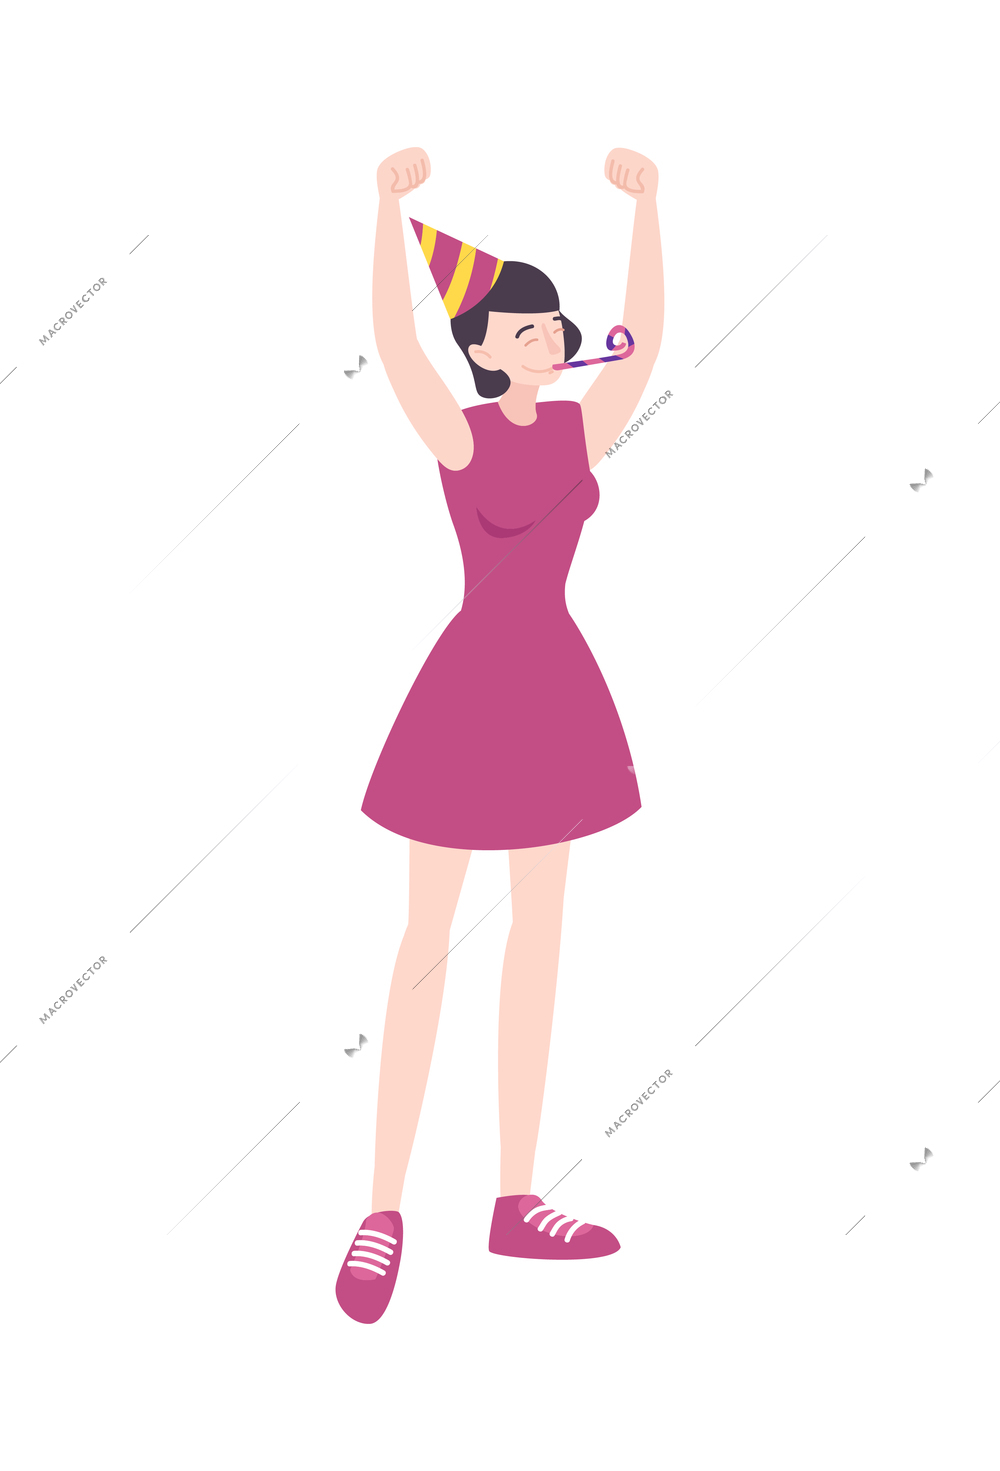 Birthday celebration anniversary composition with isolated doodle human character of happy person vector illustration